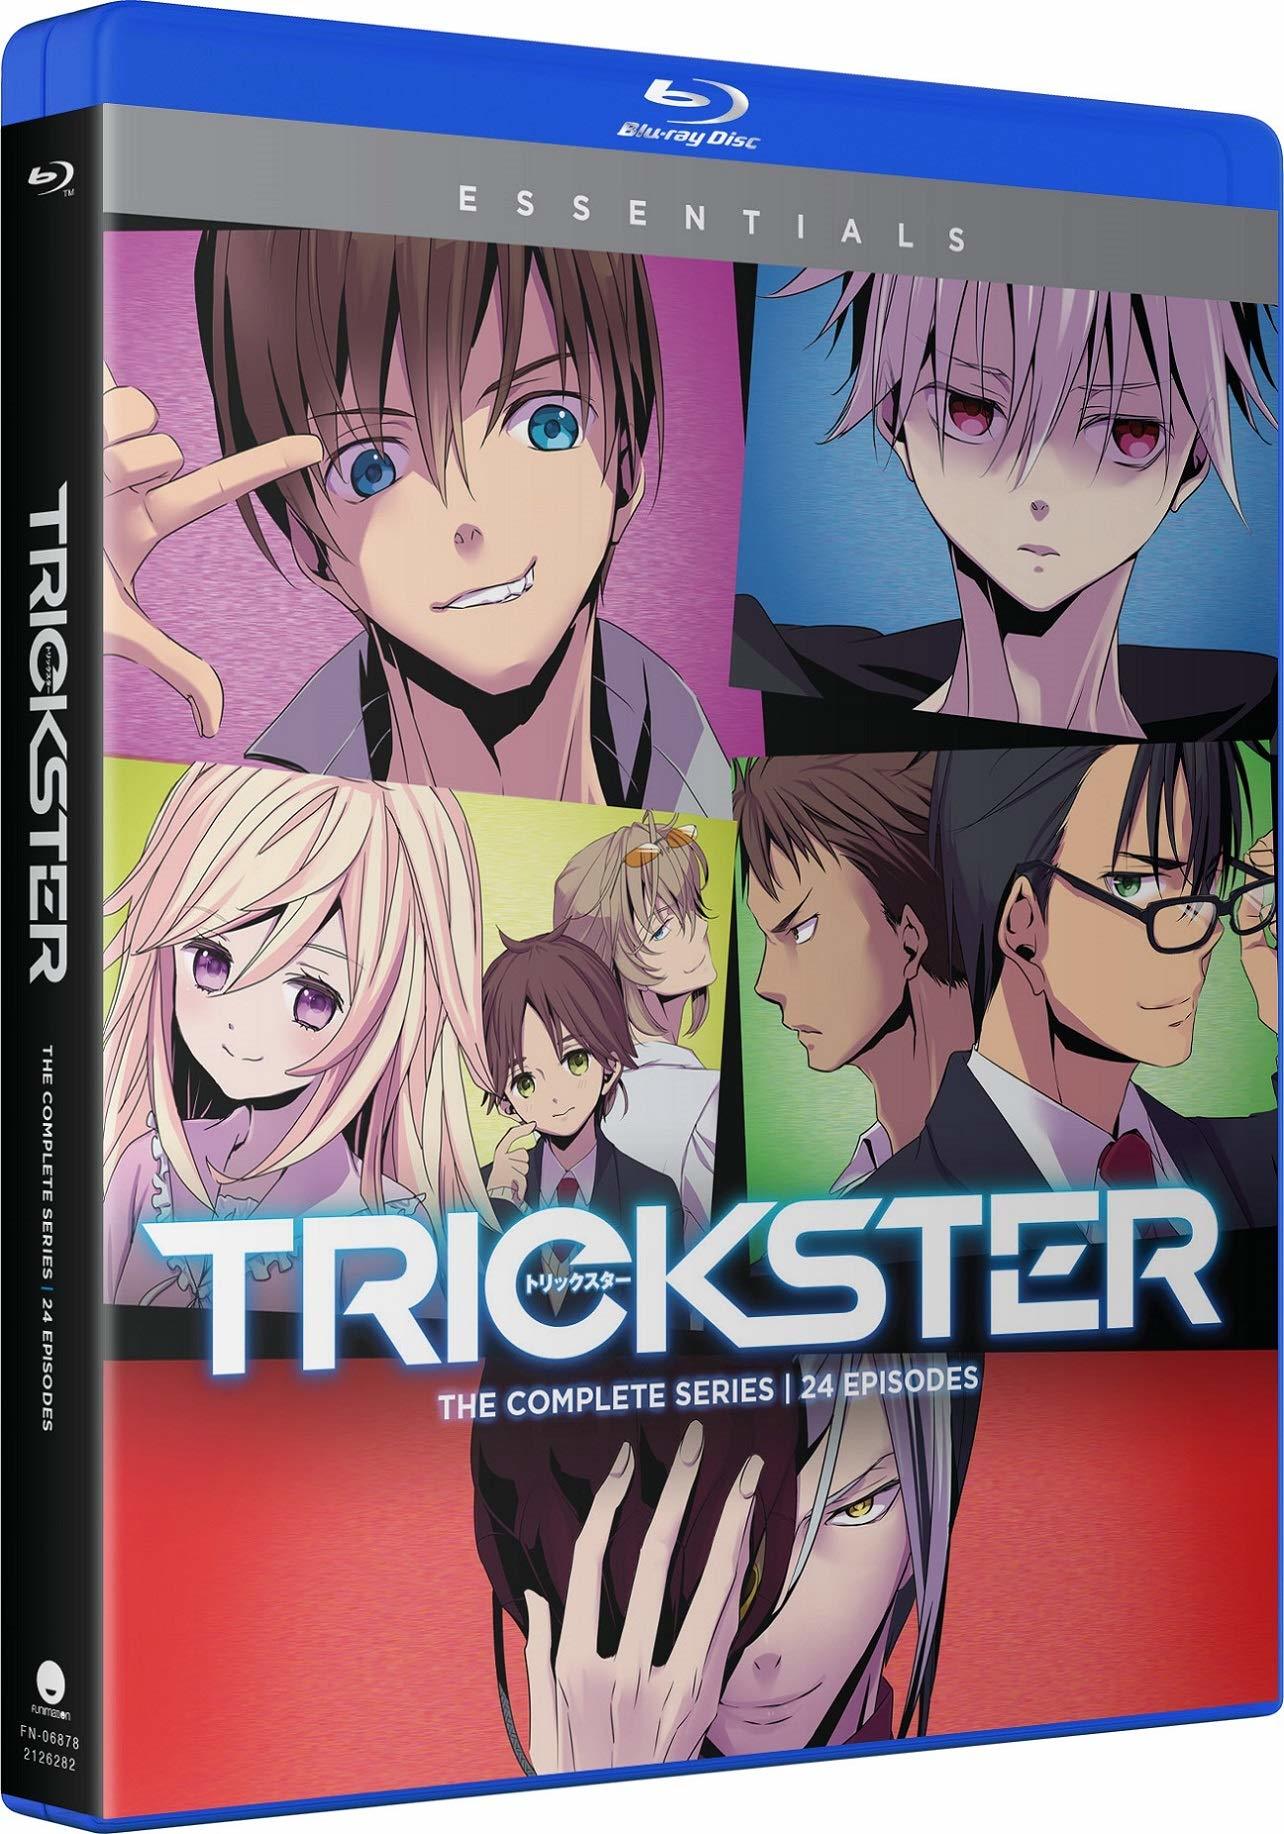 Trickster: The Complete Series Blu-ray (Essentials)